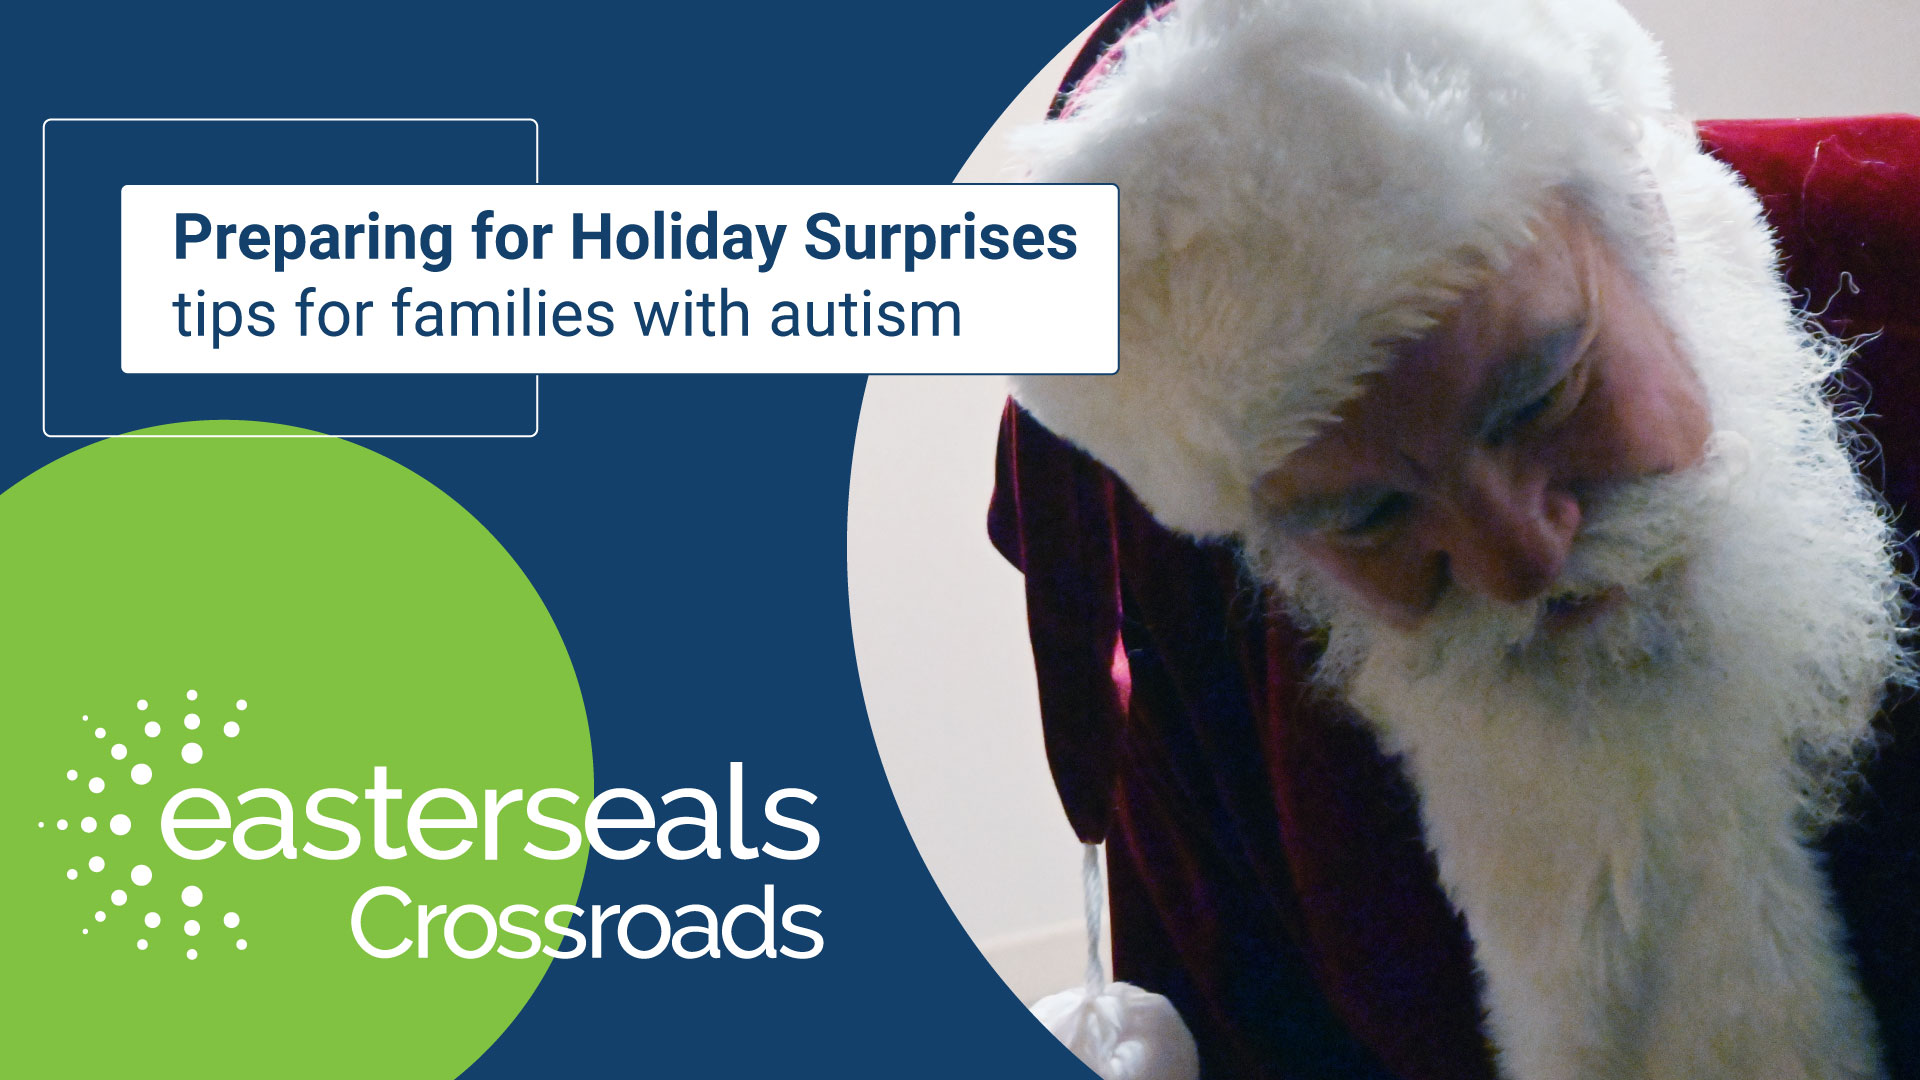 words Preparing for Holiday Surprises and tips for families with autism photo of Santa